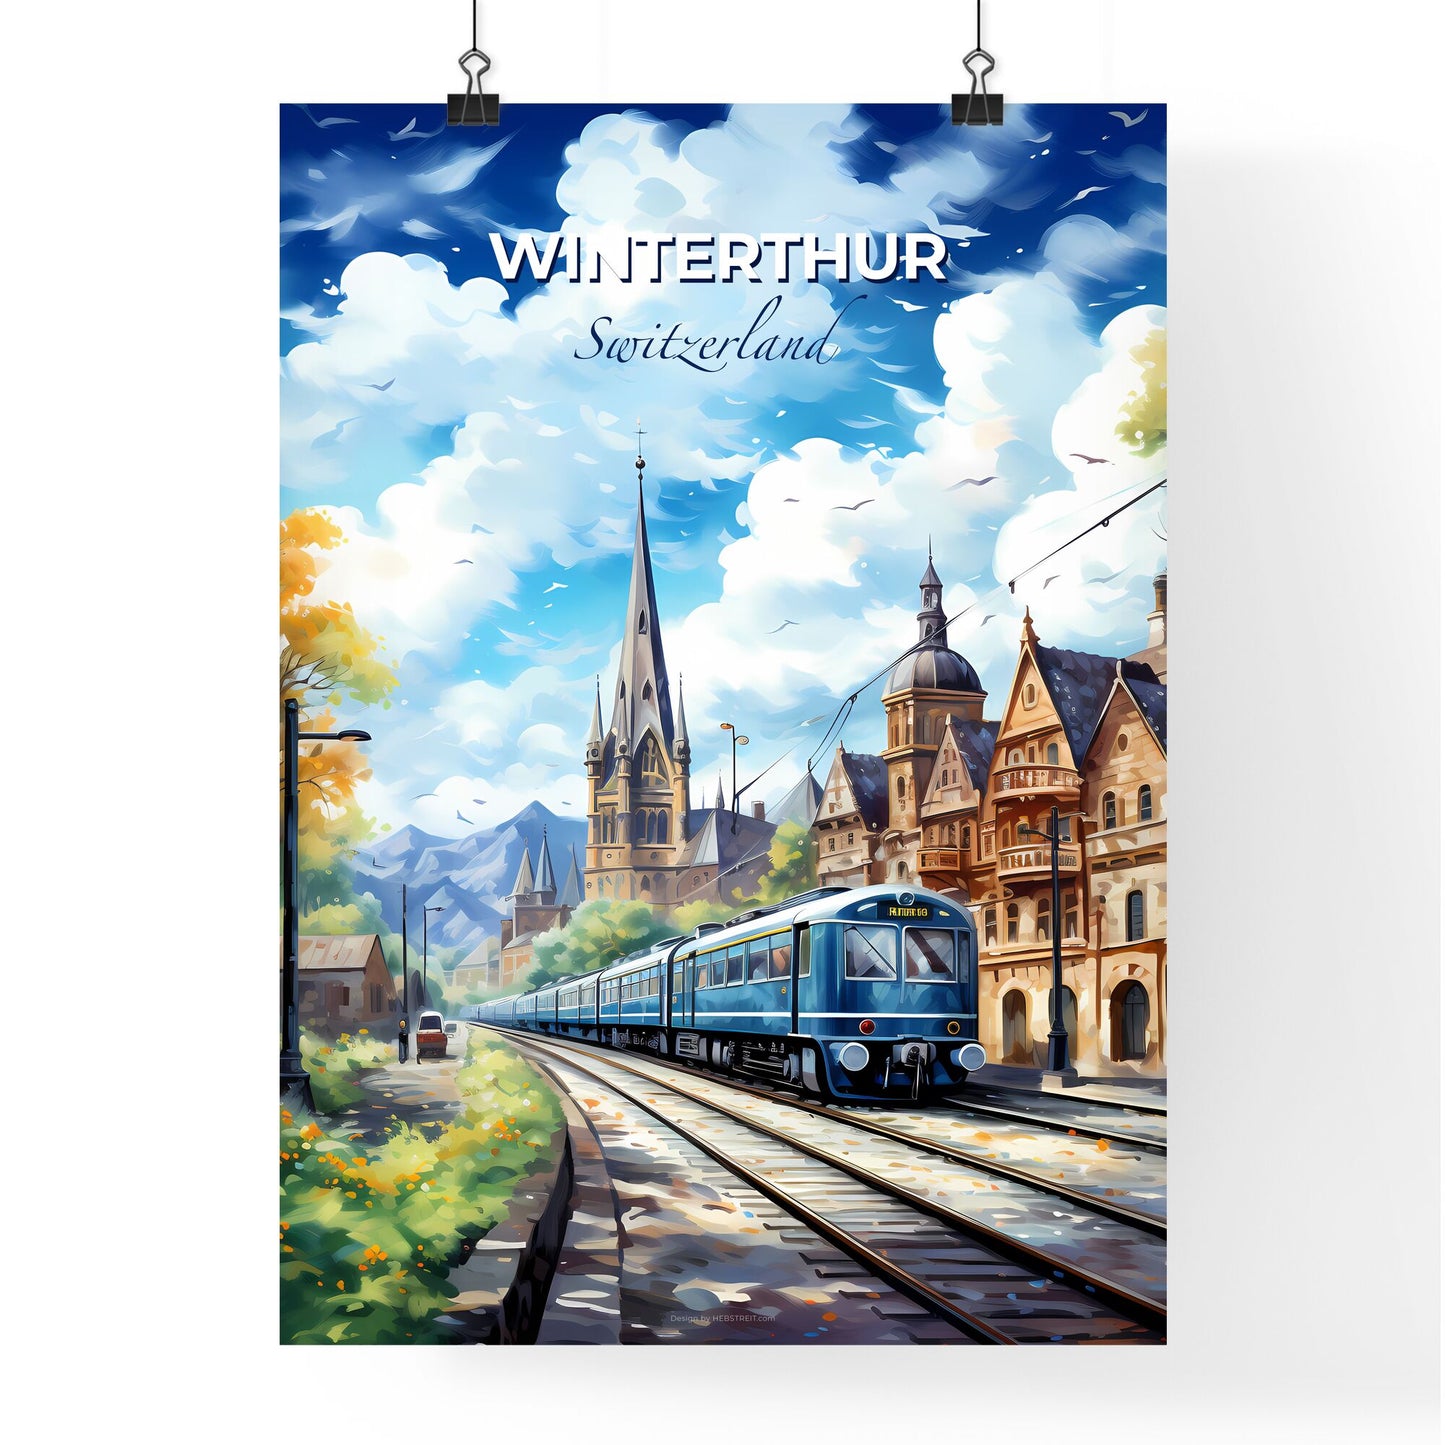 Winterthur, Switzerland, A Poster of a train on the tracks Default Title